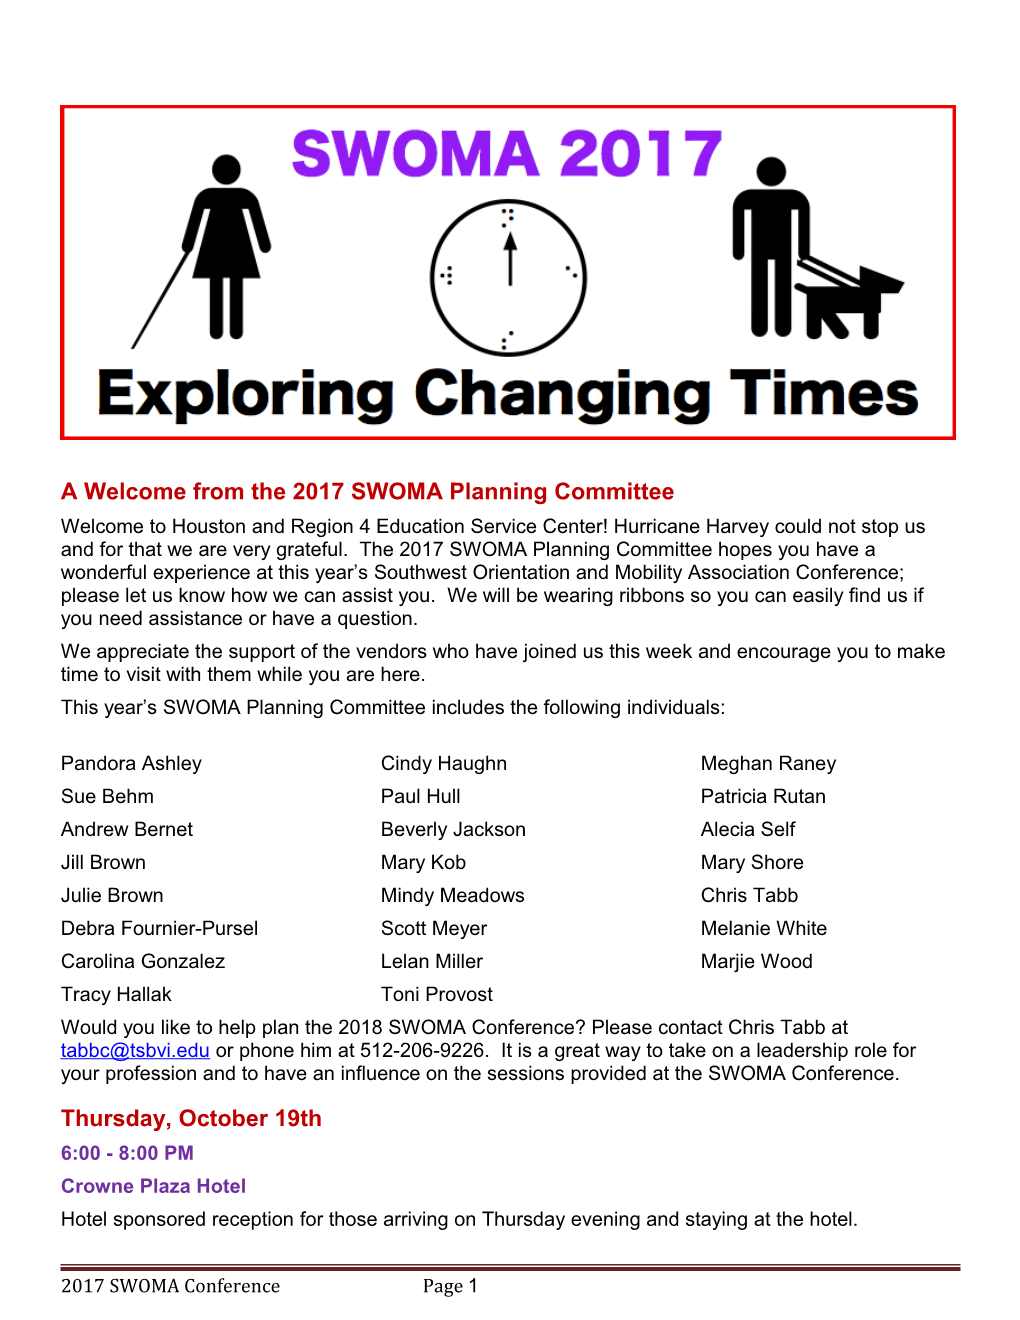 A Welcome from the 2017 SWOMA Planning Committee